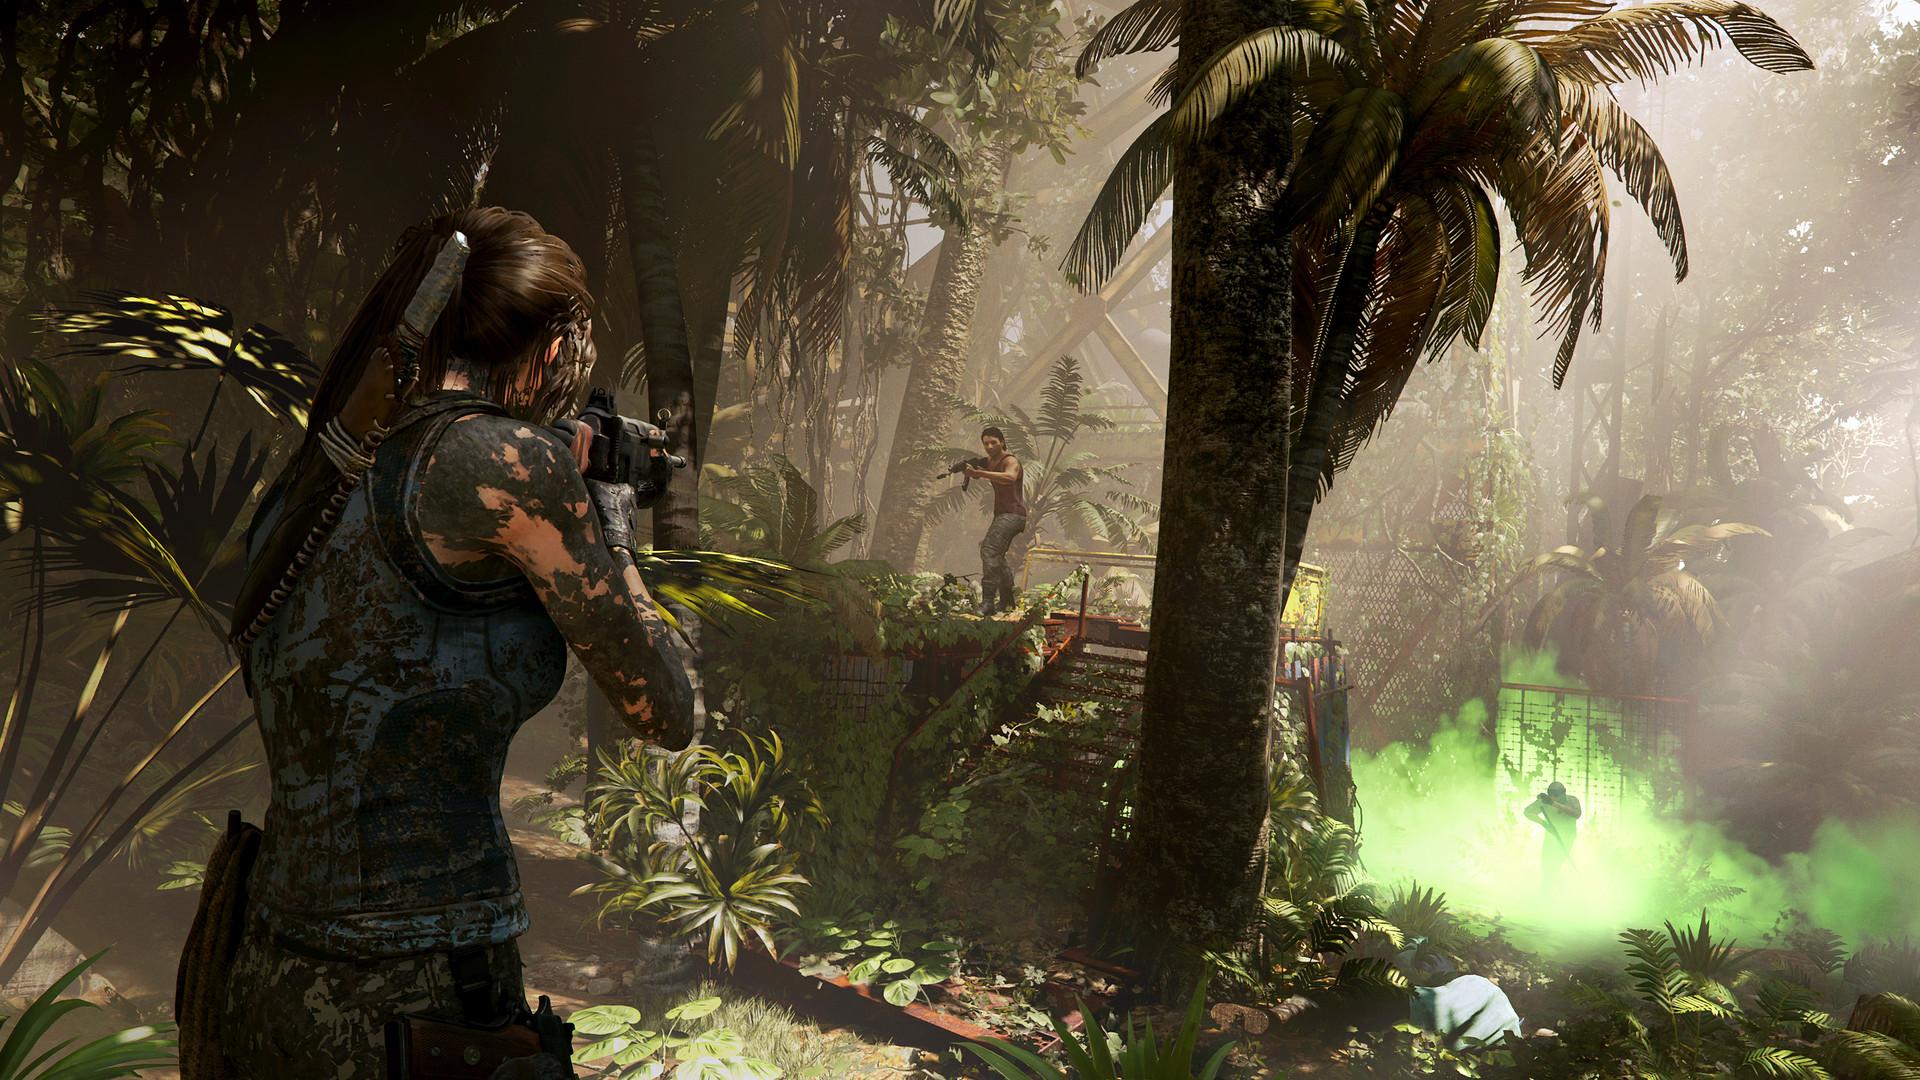 https://media.imgcdn.org/repo/2023/04/shadow-of-the-tomb-raider-definitive-edition/6439c65f409cf-shadow-of-the-tomb-raider-definitive-edition-screenshot4.jpg